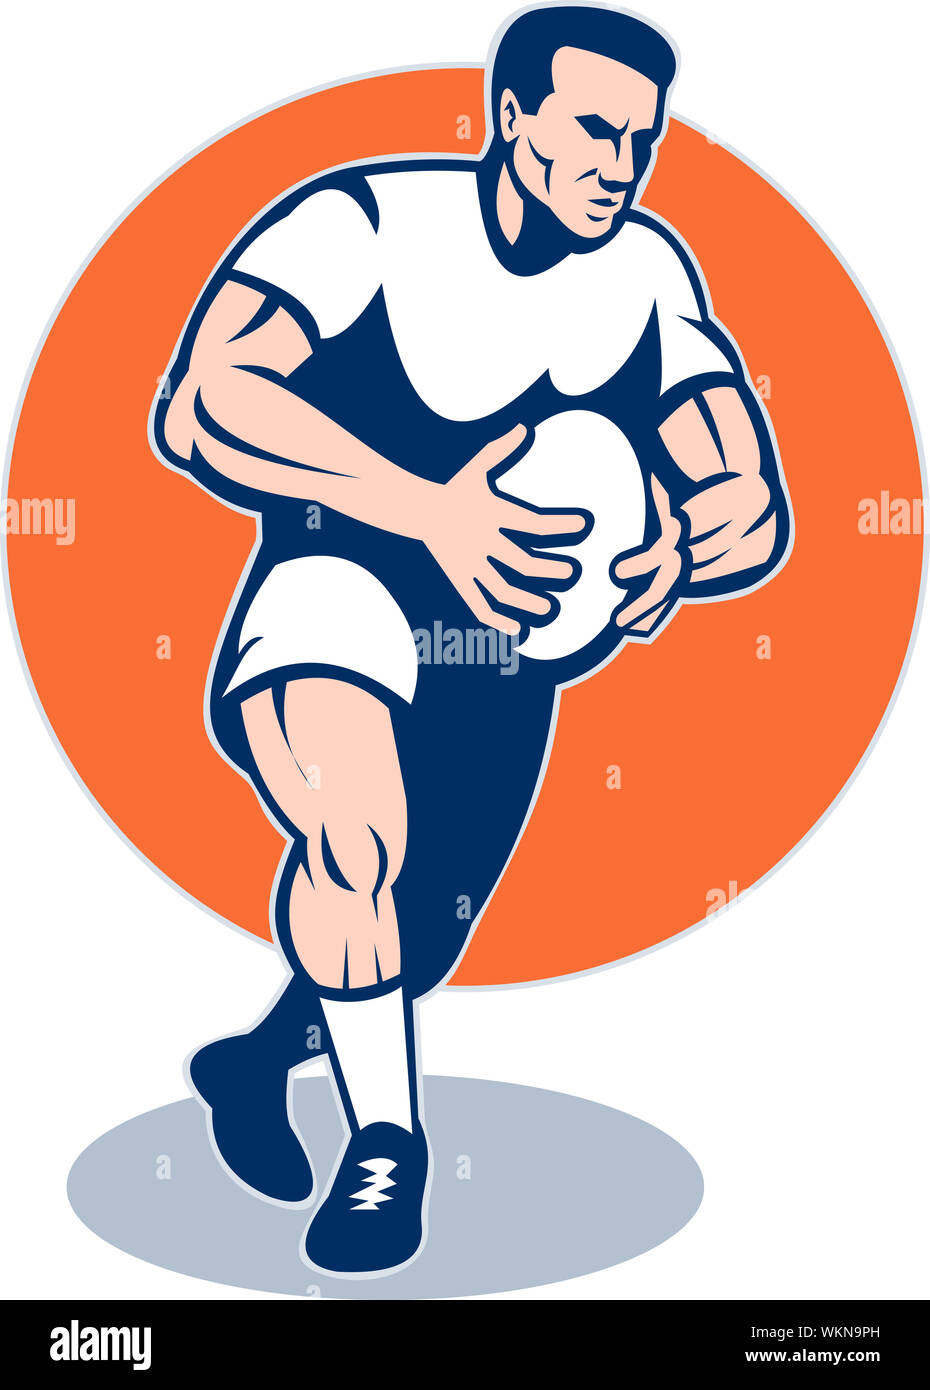 illustration of a rugby player running with ball done in retro style Stock Photo